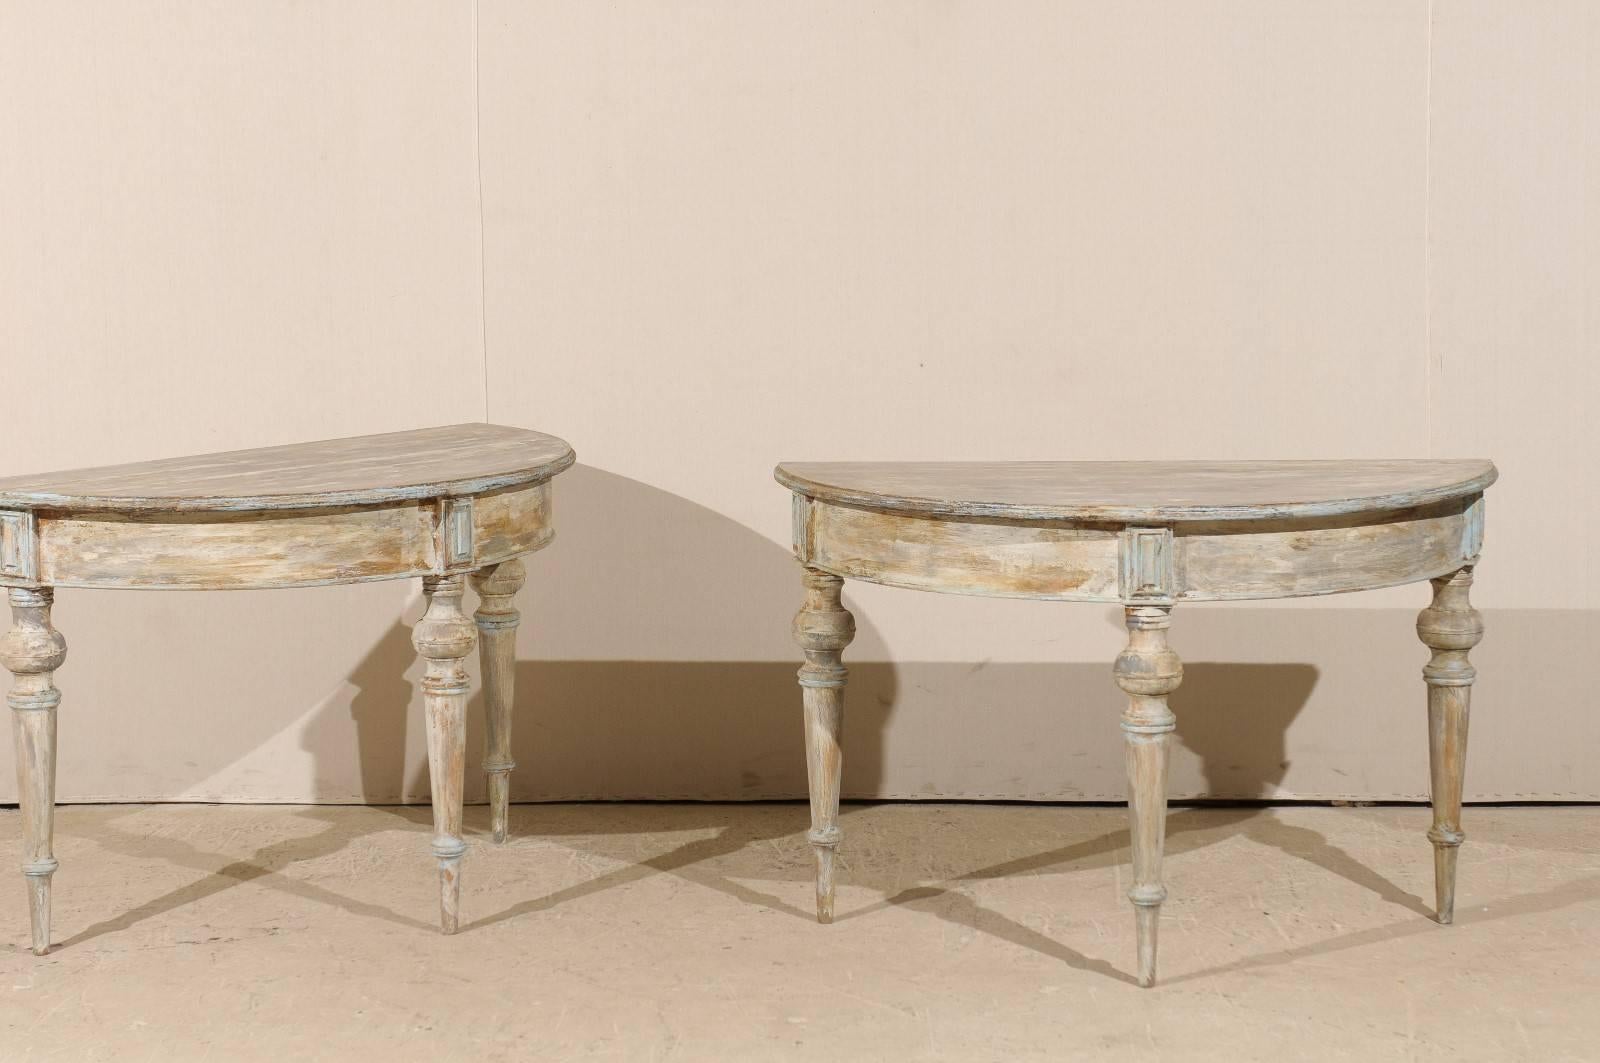 Painted Pair of 19th Century Swedish Demilune Tables in Taupe, Cream & Soft Blue Colors